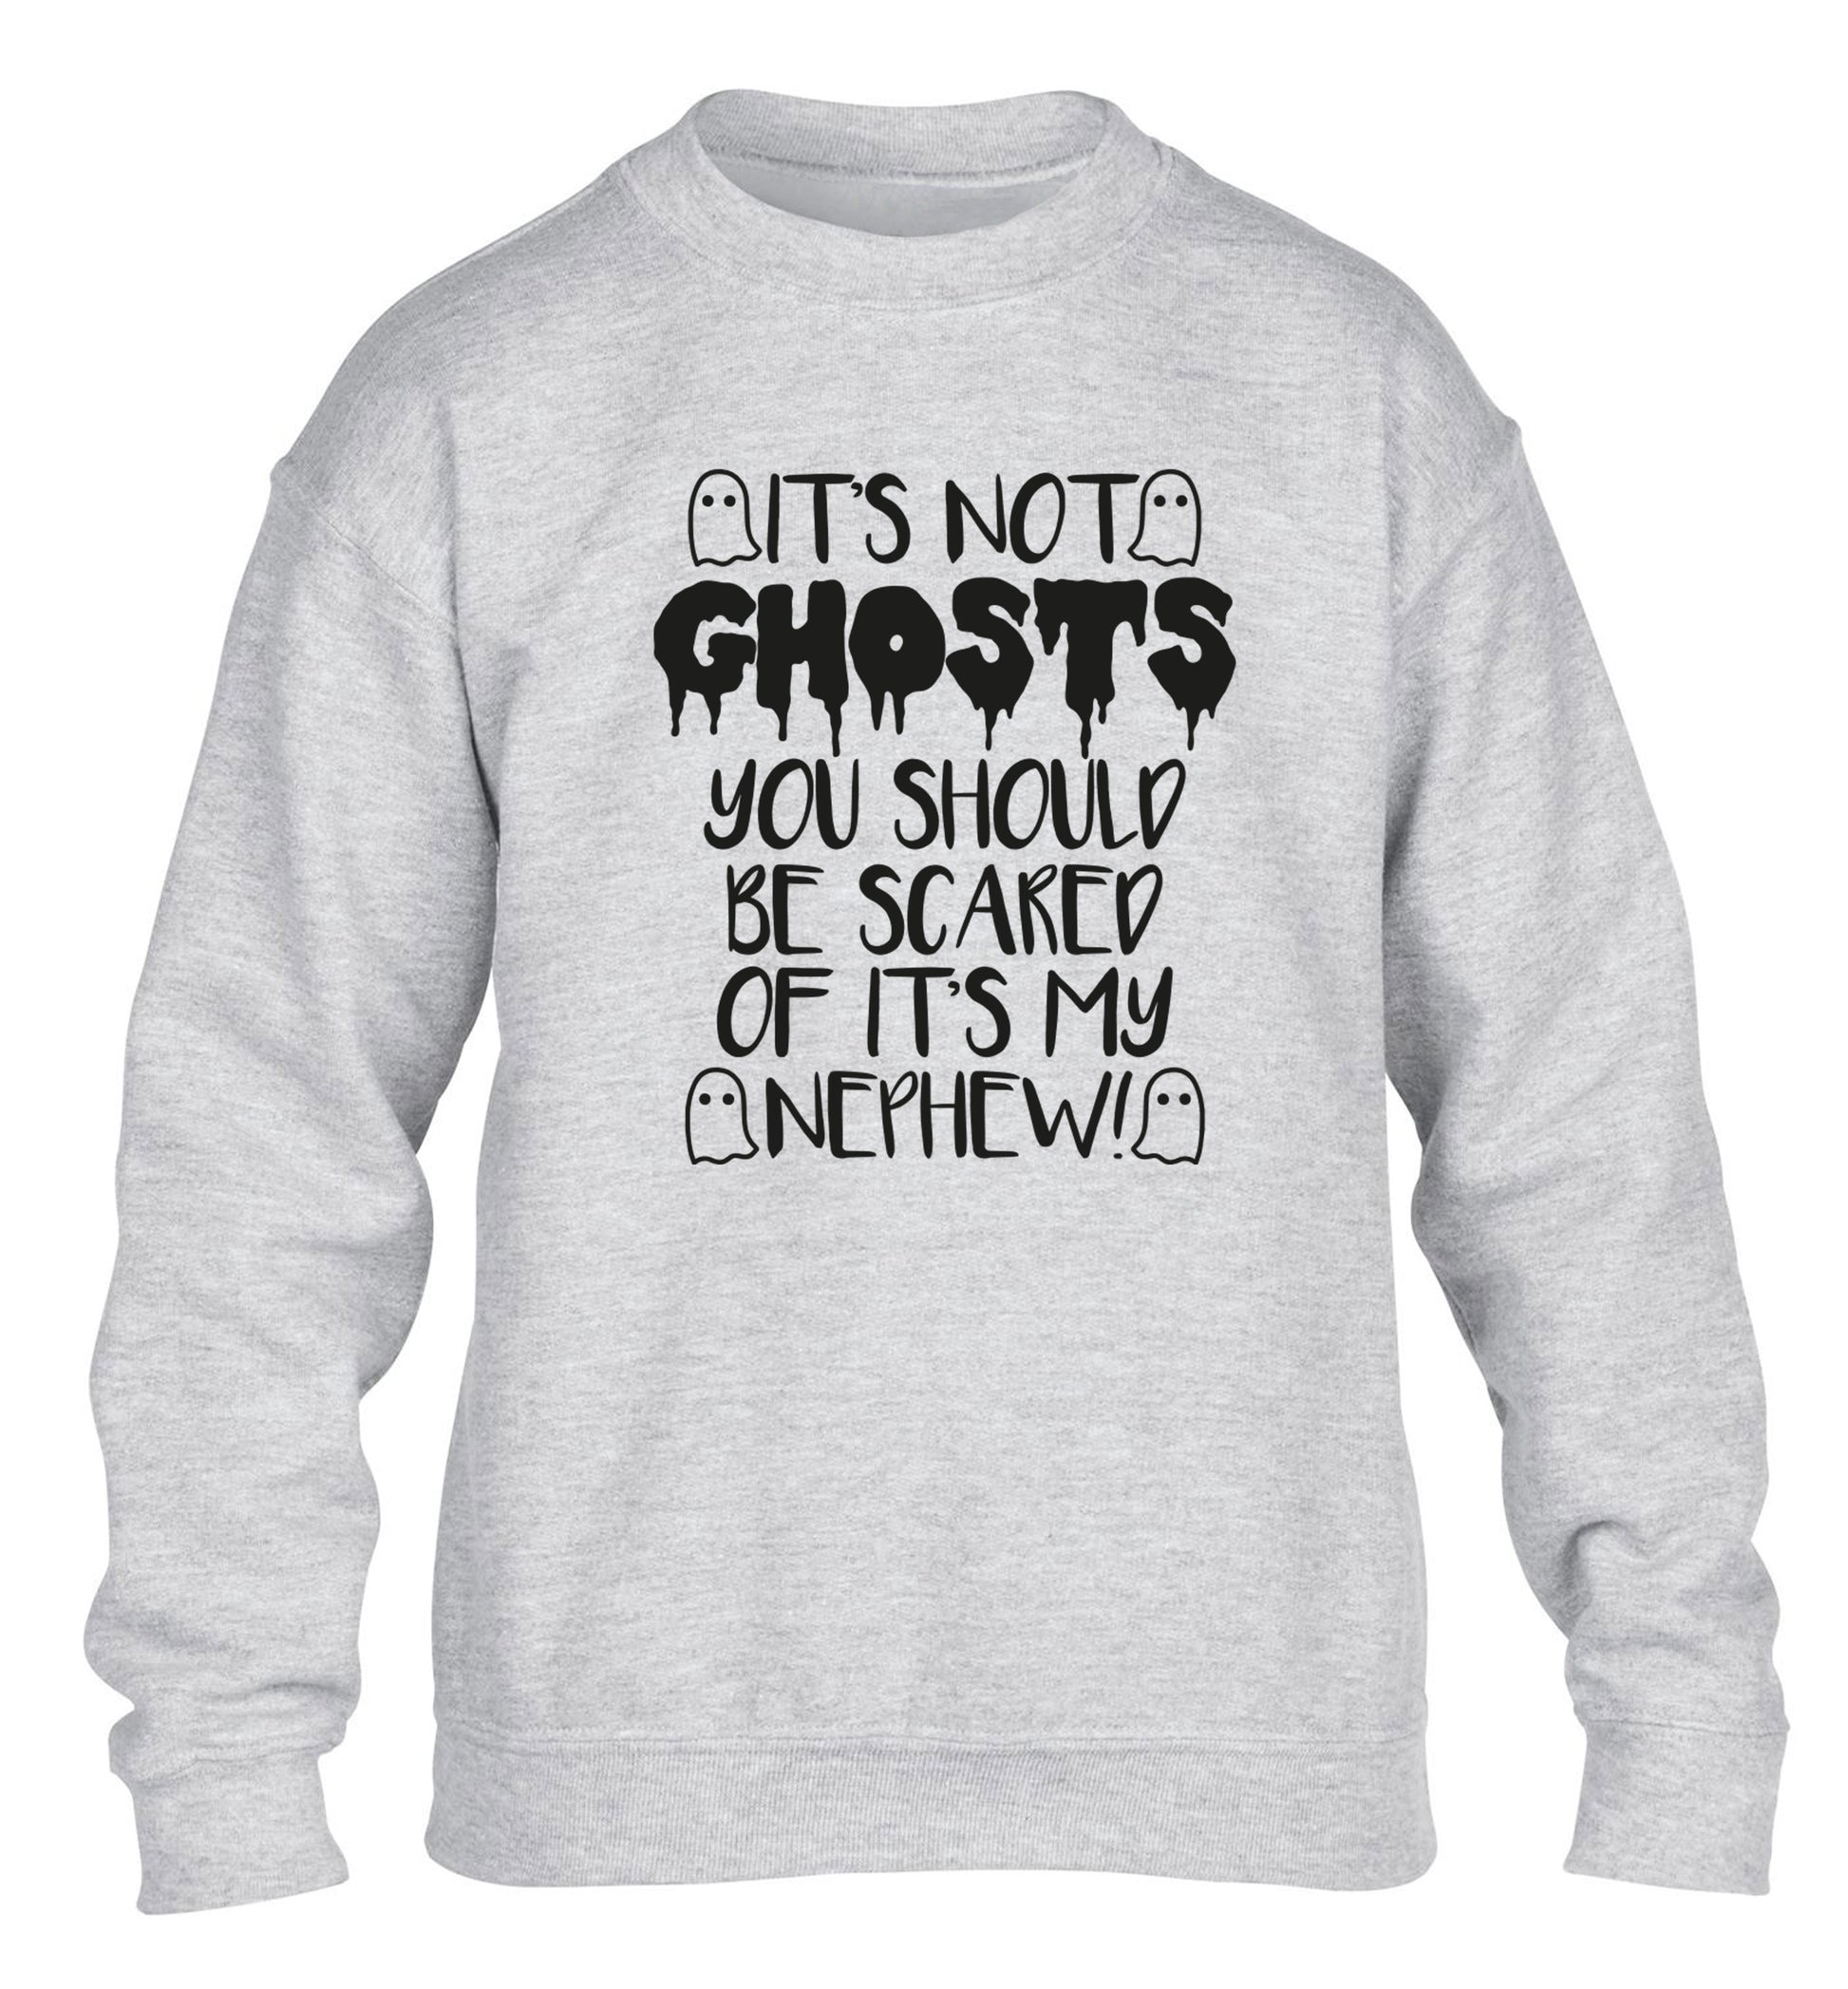 It's not ghosts you should be scared of it's my nephew! children's grey sweater 12-14 Years